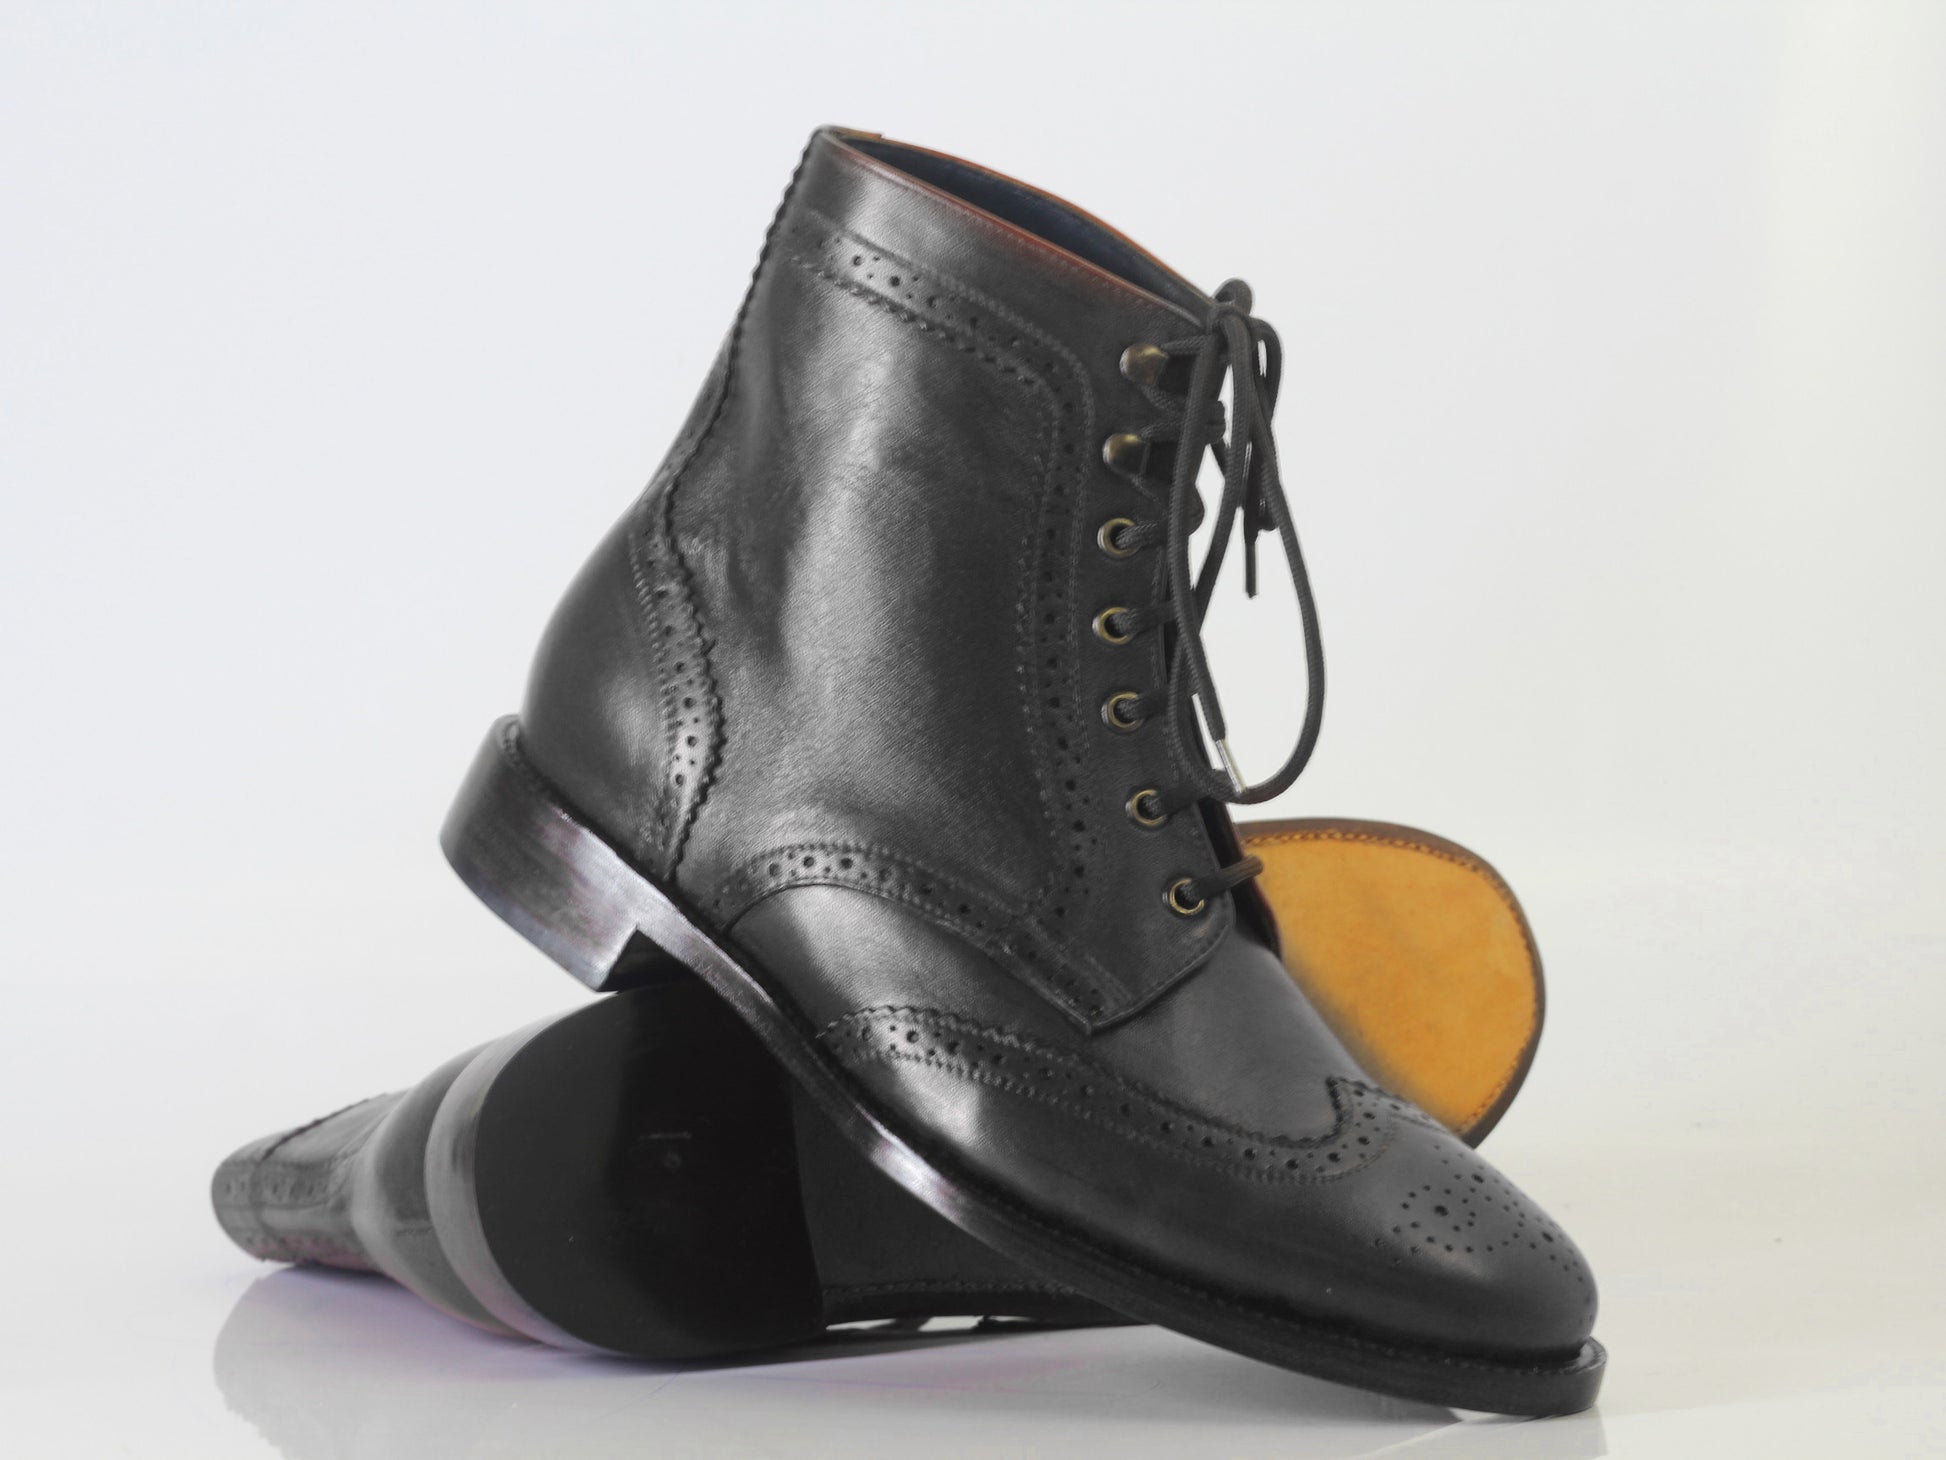 Handmade Men's Ankle High Black Leather Boots, Men Wing Tip Brogue Fashion Boots - theleathersouq